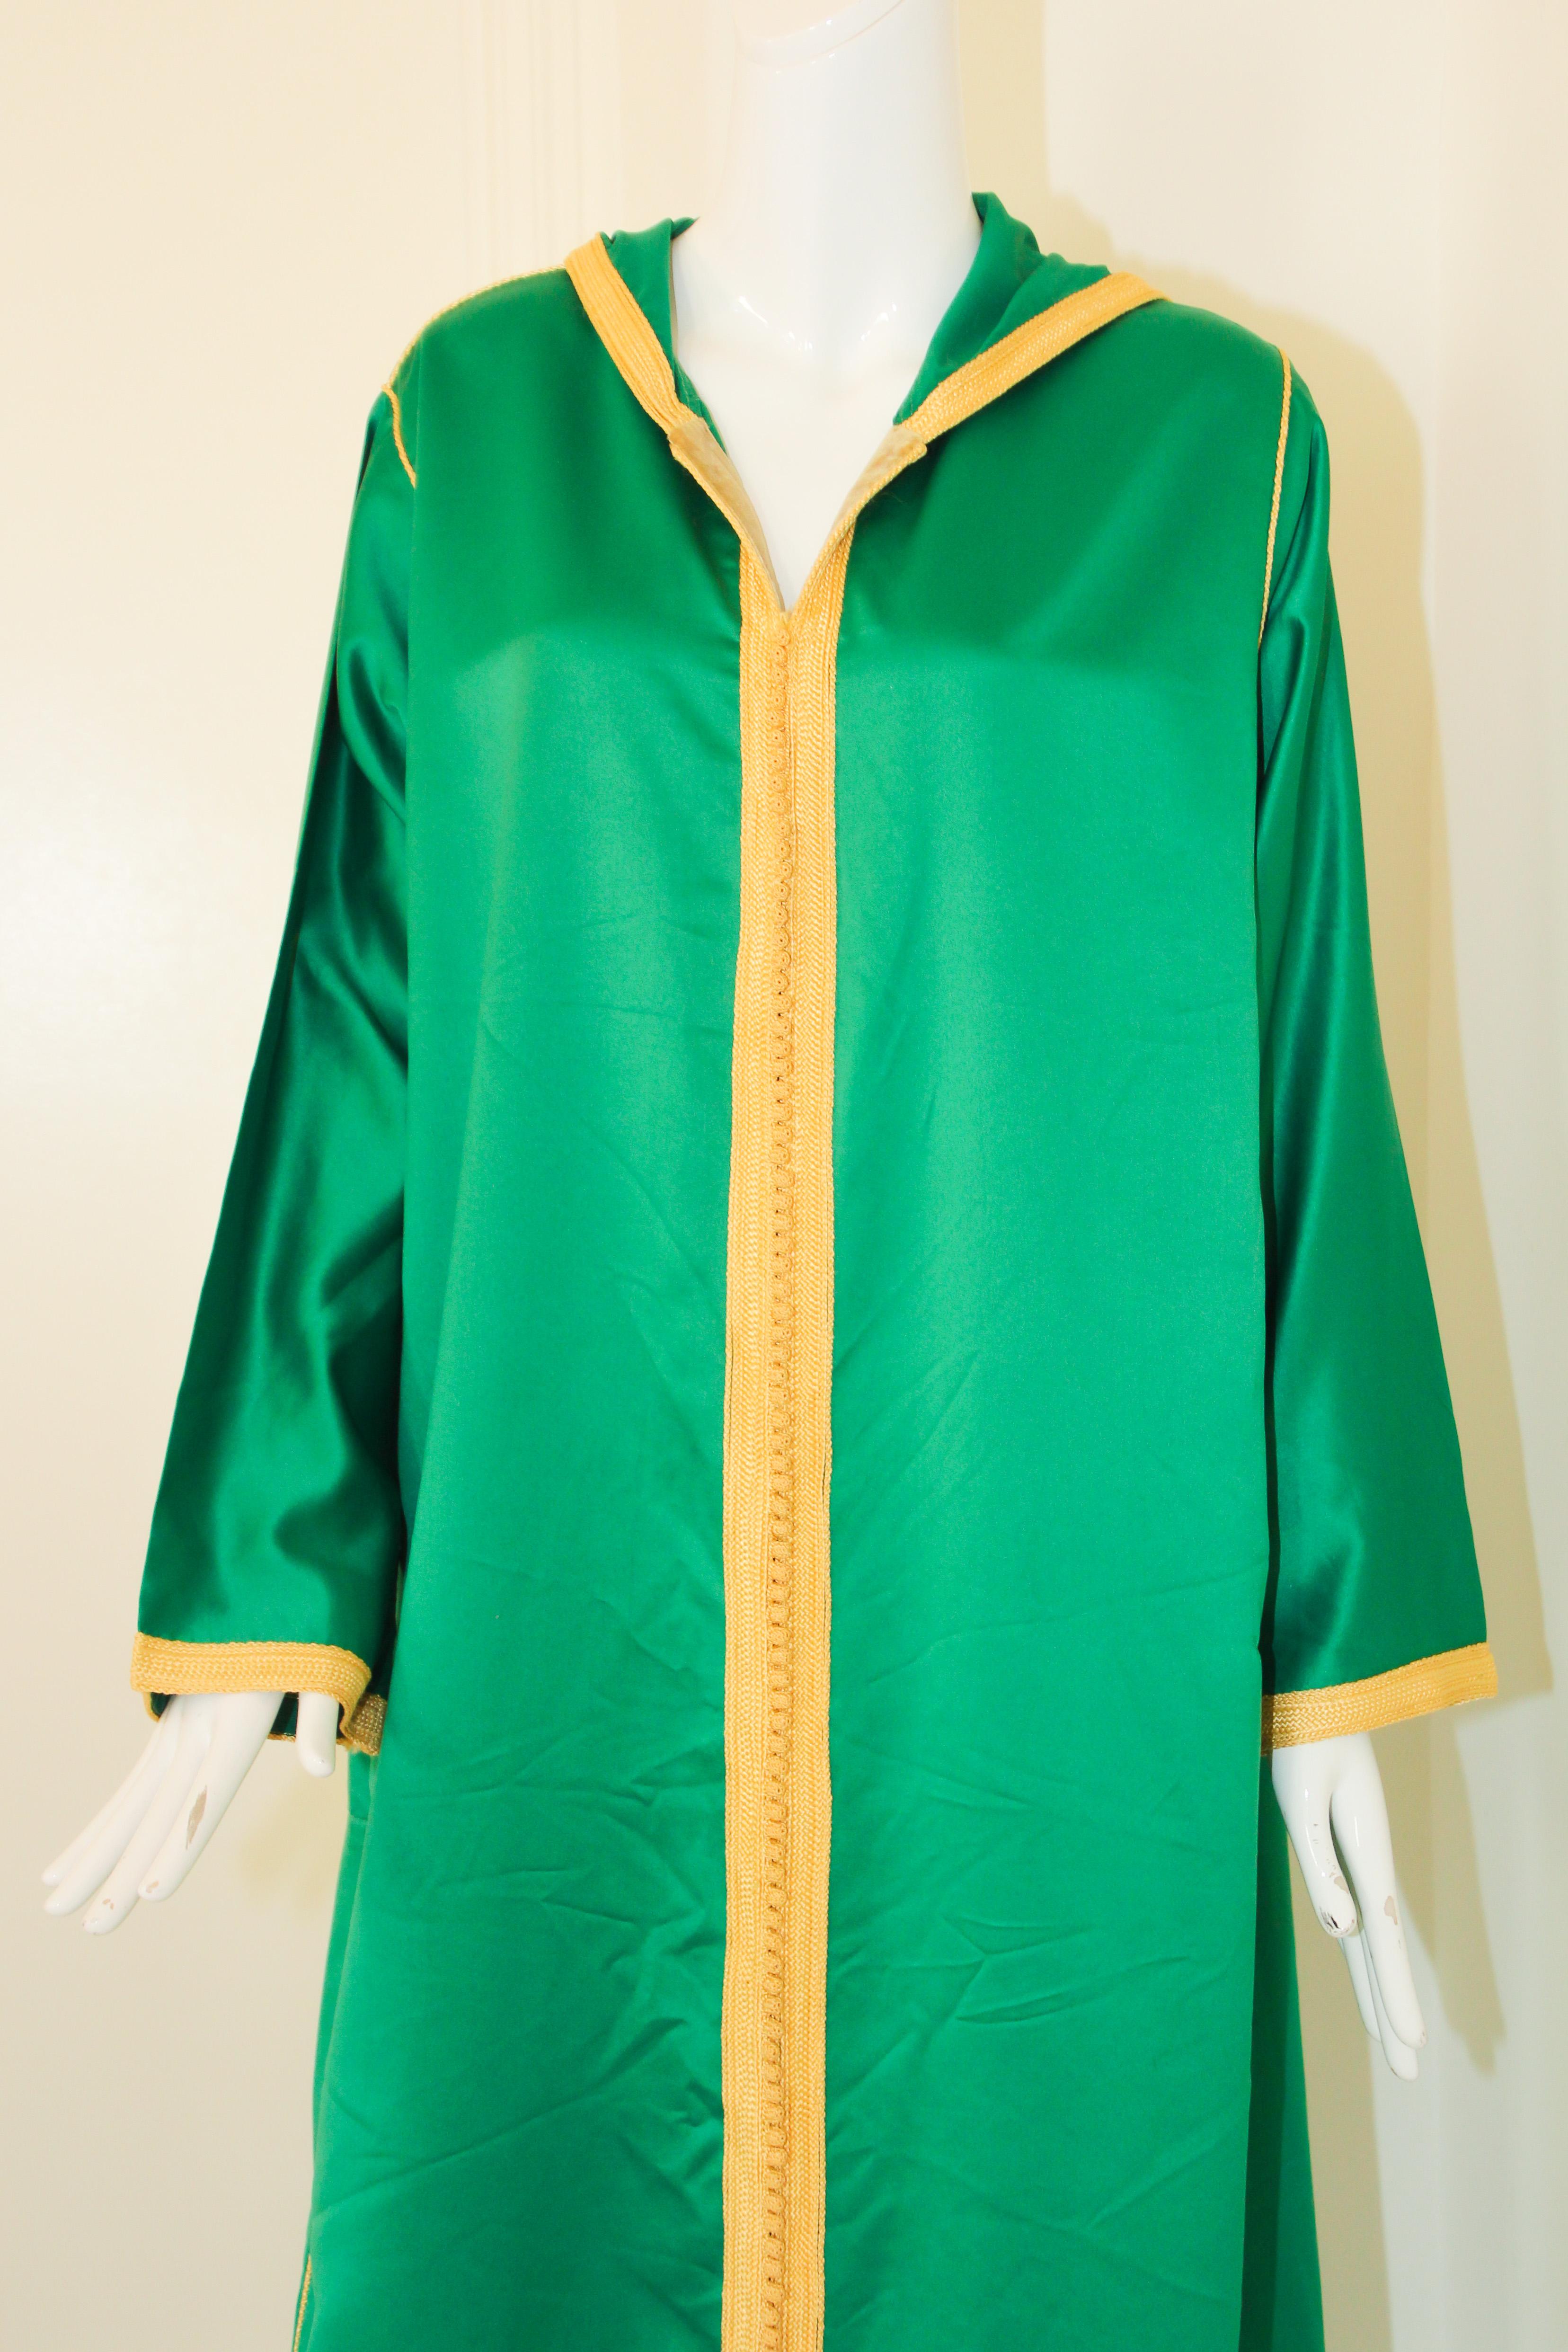 Moroccan Hooded Caftan Emerald Green Djellabah Kaftan In Good Condition For Sale In North Hollywood, CA